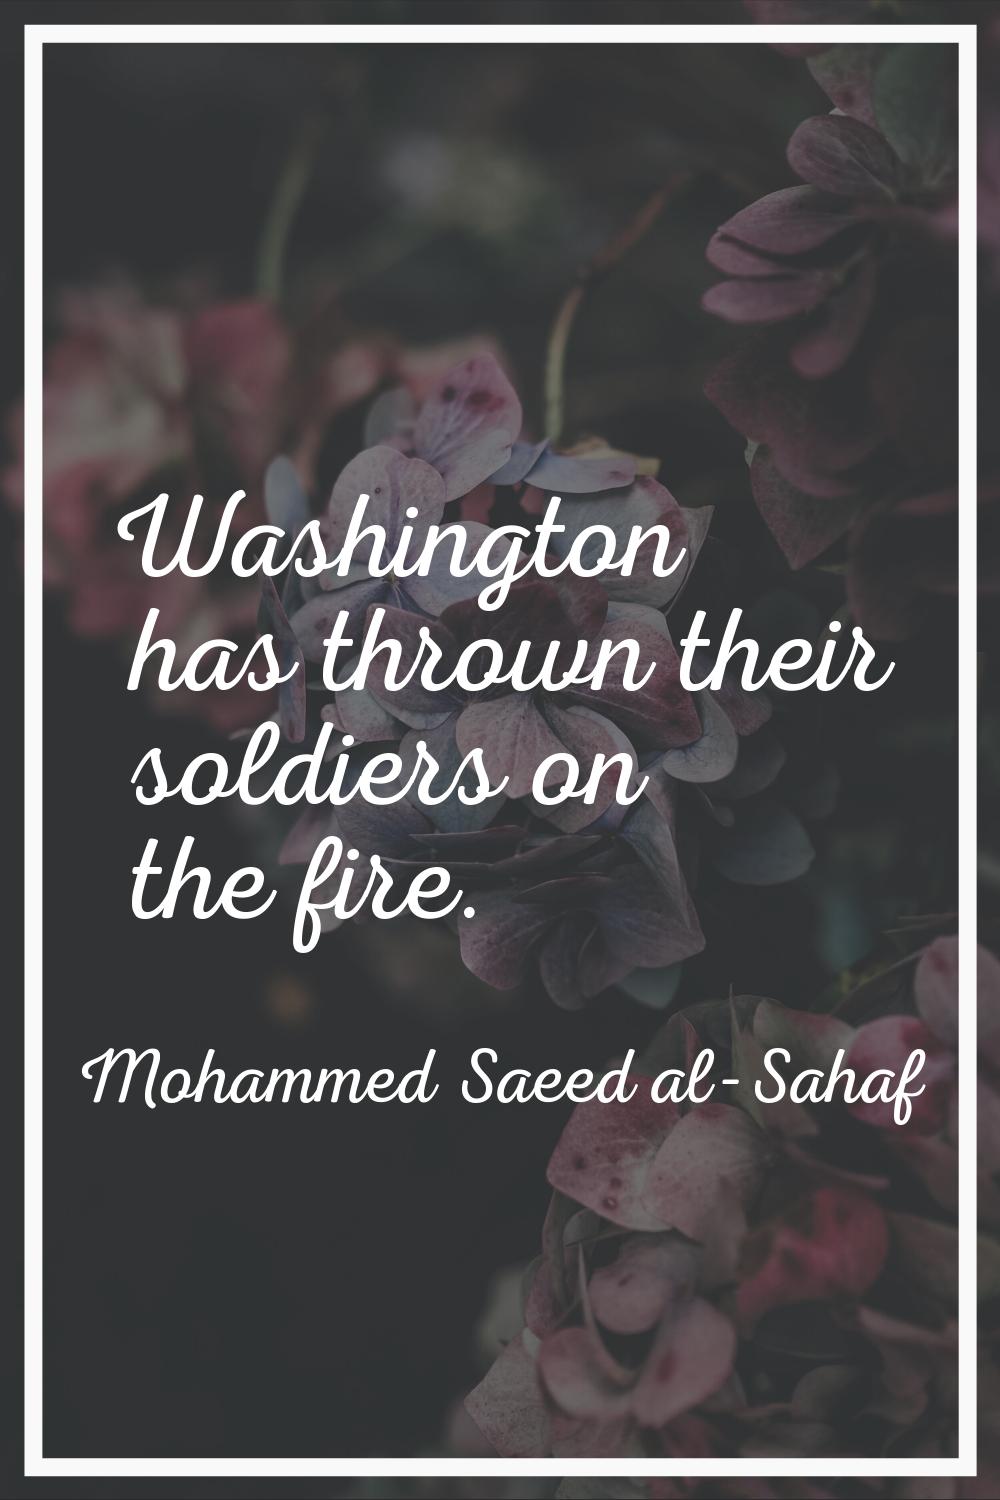 Washington has thrown their soldiers on the fire.